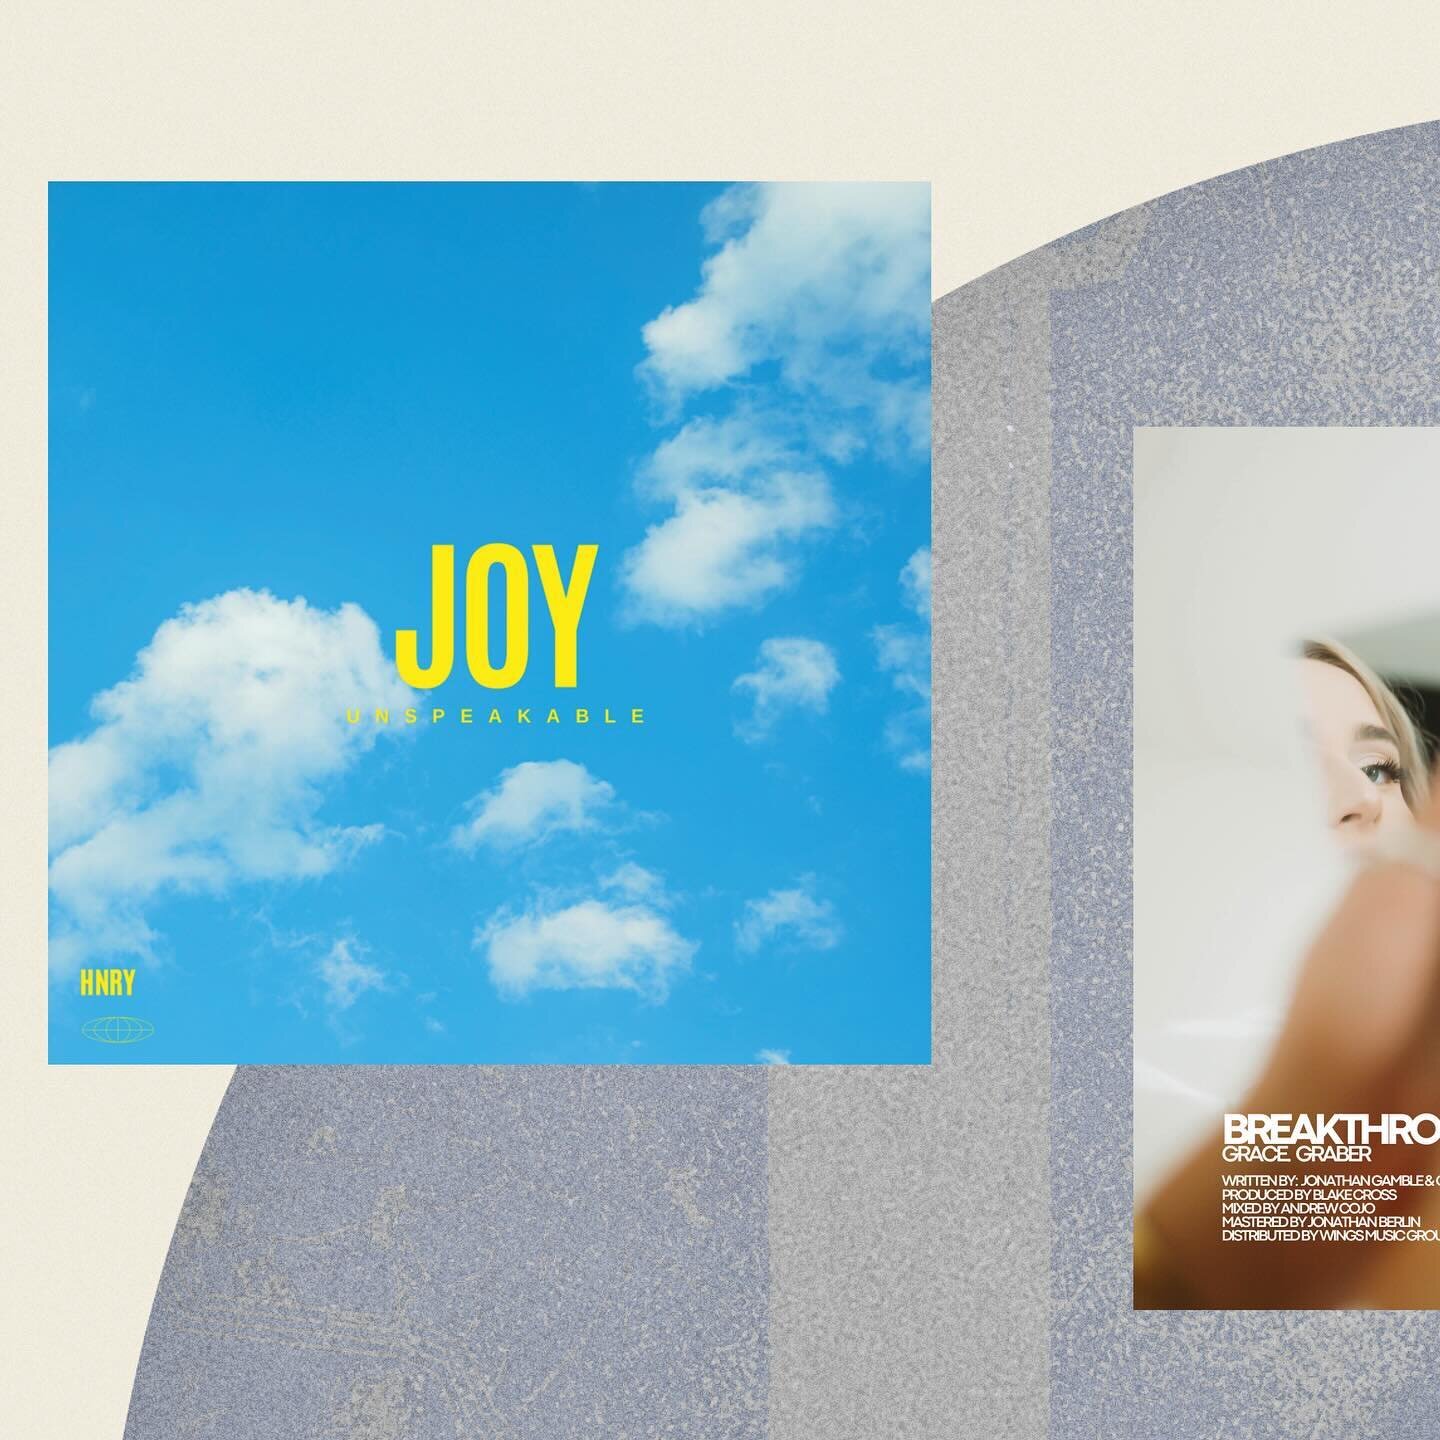 NEW MUSIC FRIDAY 08.03.24
.
.
🌤 @hnry_music with &lsquo;Joy Unspeakable&rsquo;
🌤 @gracegrabermusic with her latest single &rsquo;Breakthrough&rsquo;
🌤 @vmandnewye releases &lsquo;I Will Not Fail&rsquo;
🌤 @newwineworship with &lsquo;Peace Be With 